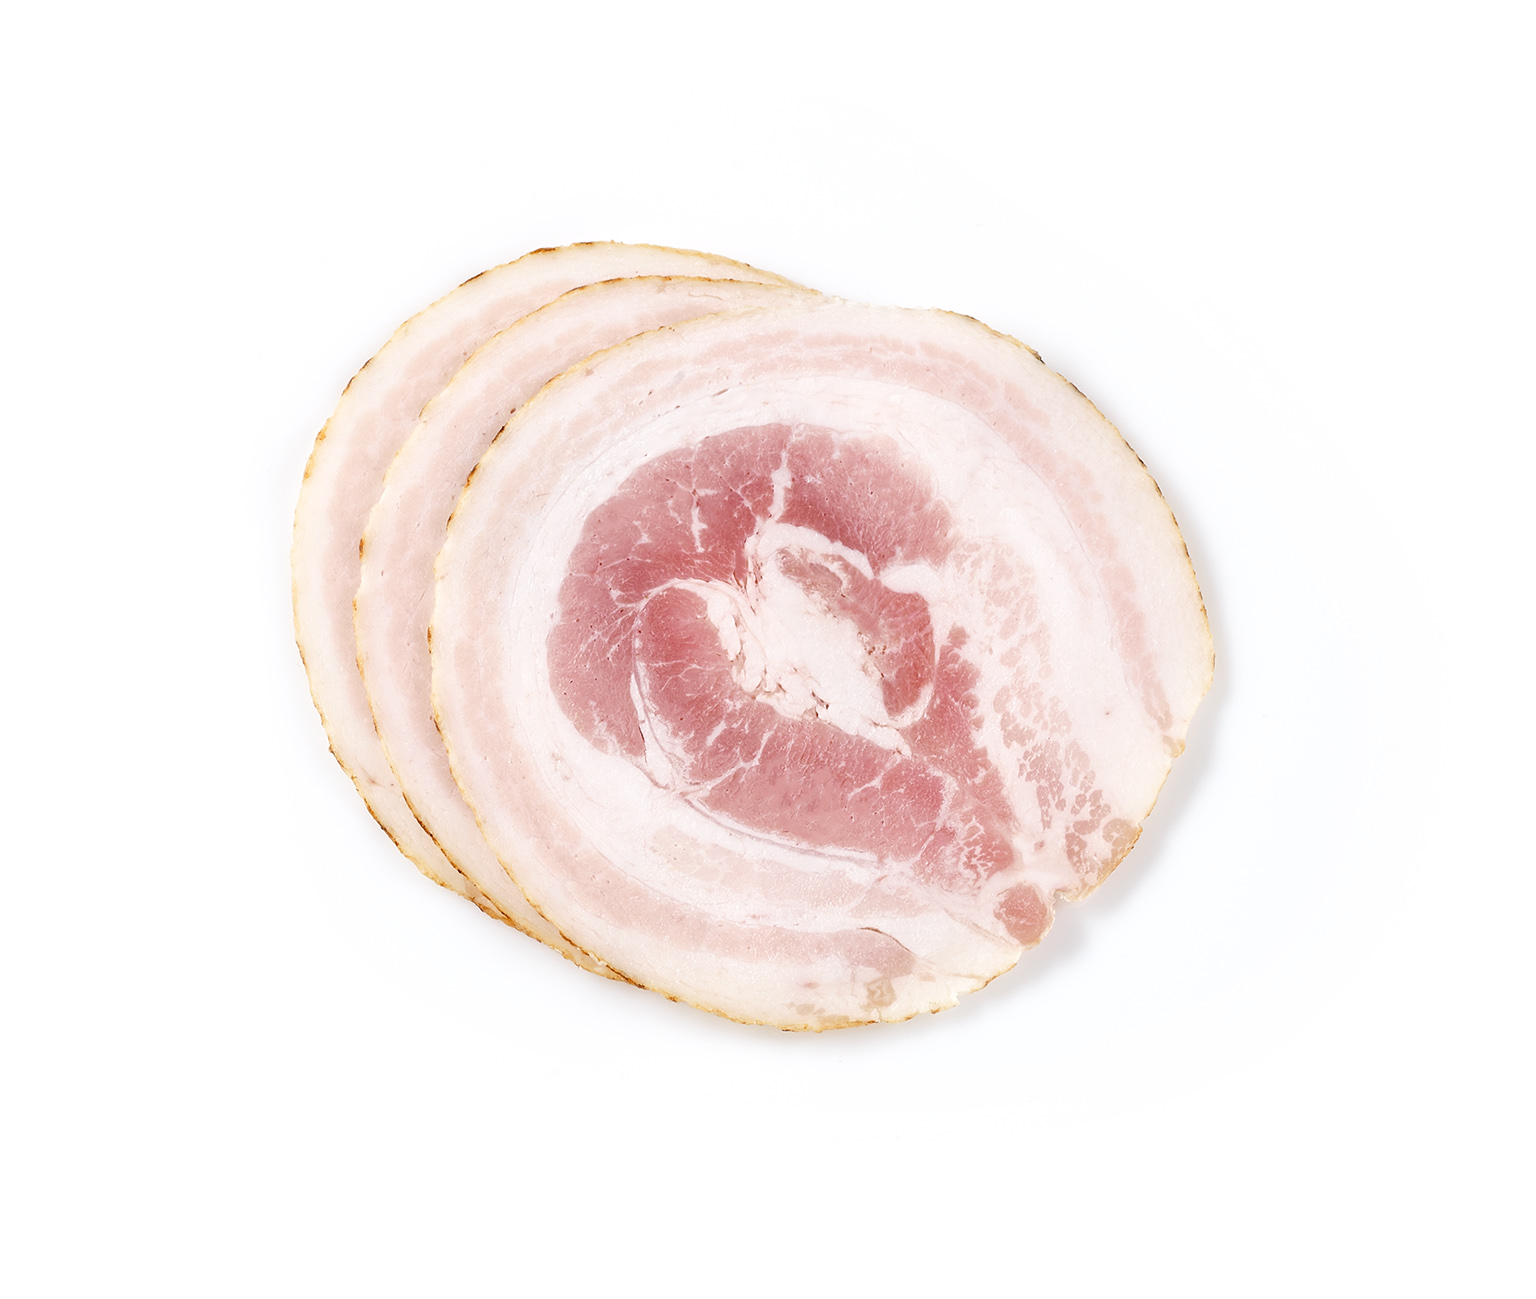 Baked Rolled  Bacon Sliced Poland manufacturer Kaminiarz